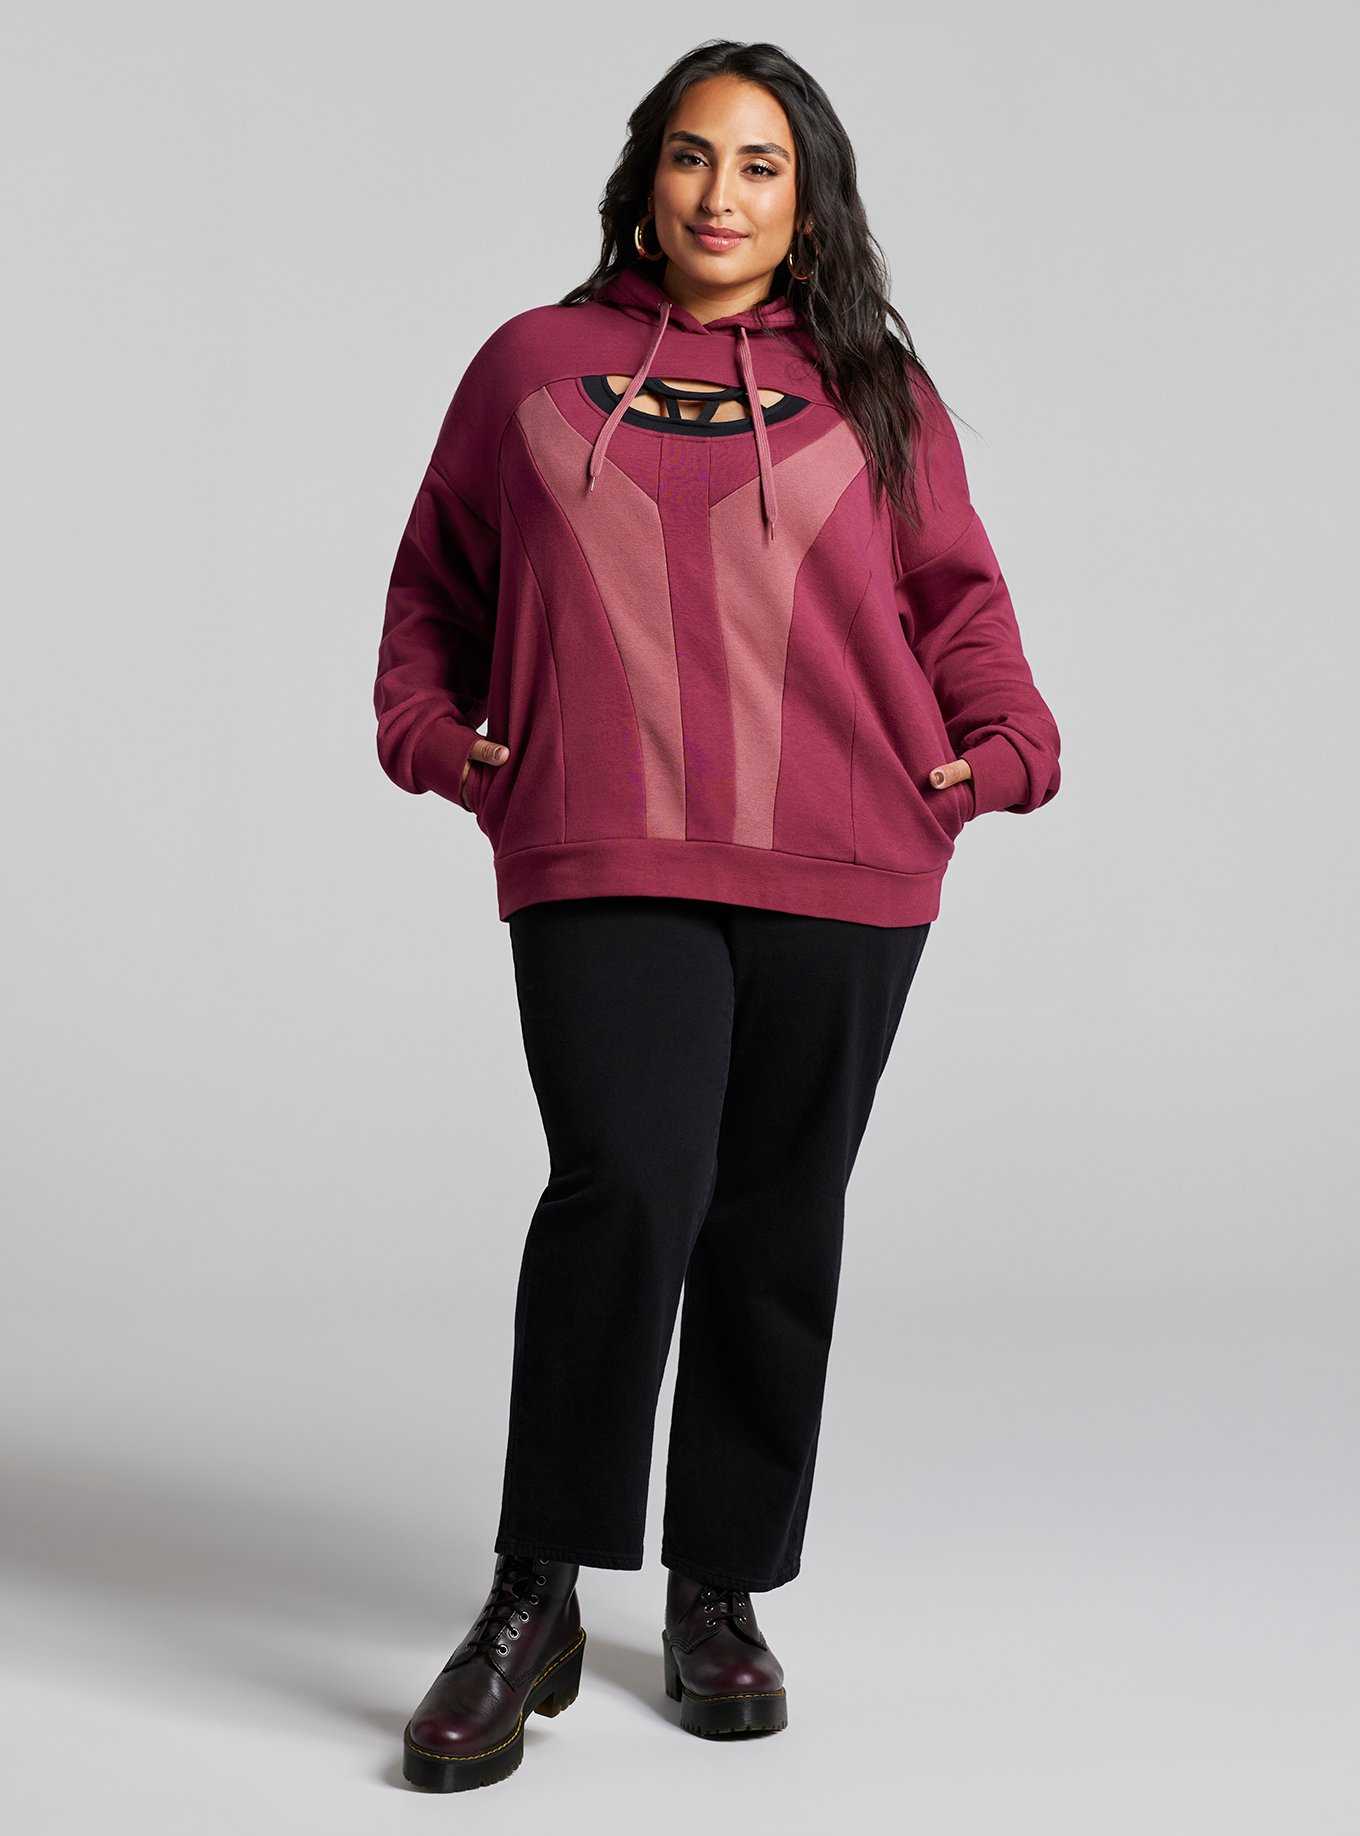 Her Universe Marvel Scarlet Witch Cutout Hoodie Plus Size Her Universe Exclusive, , hi-res